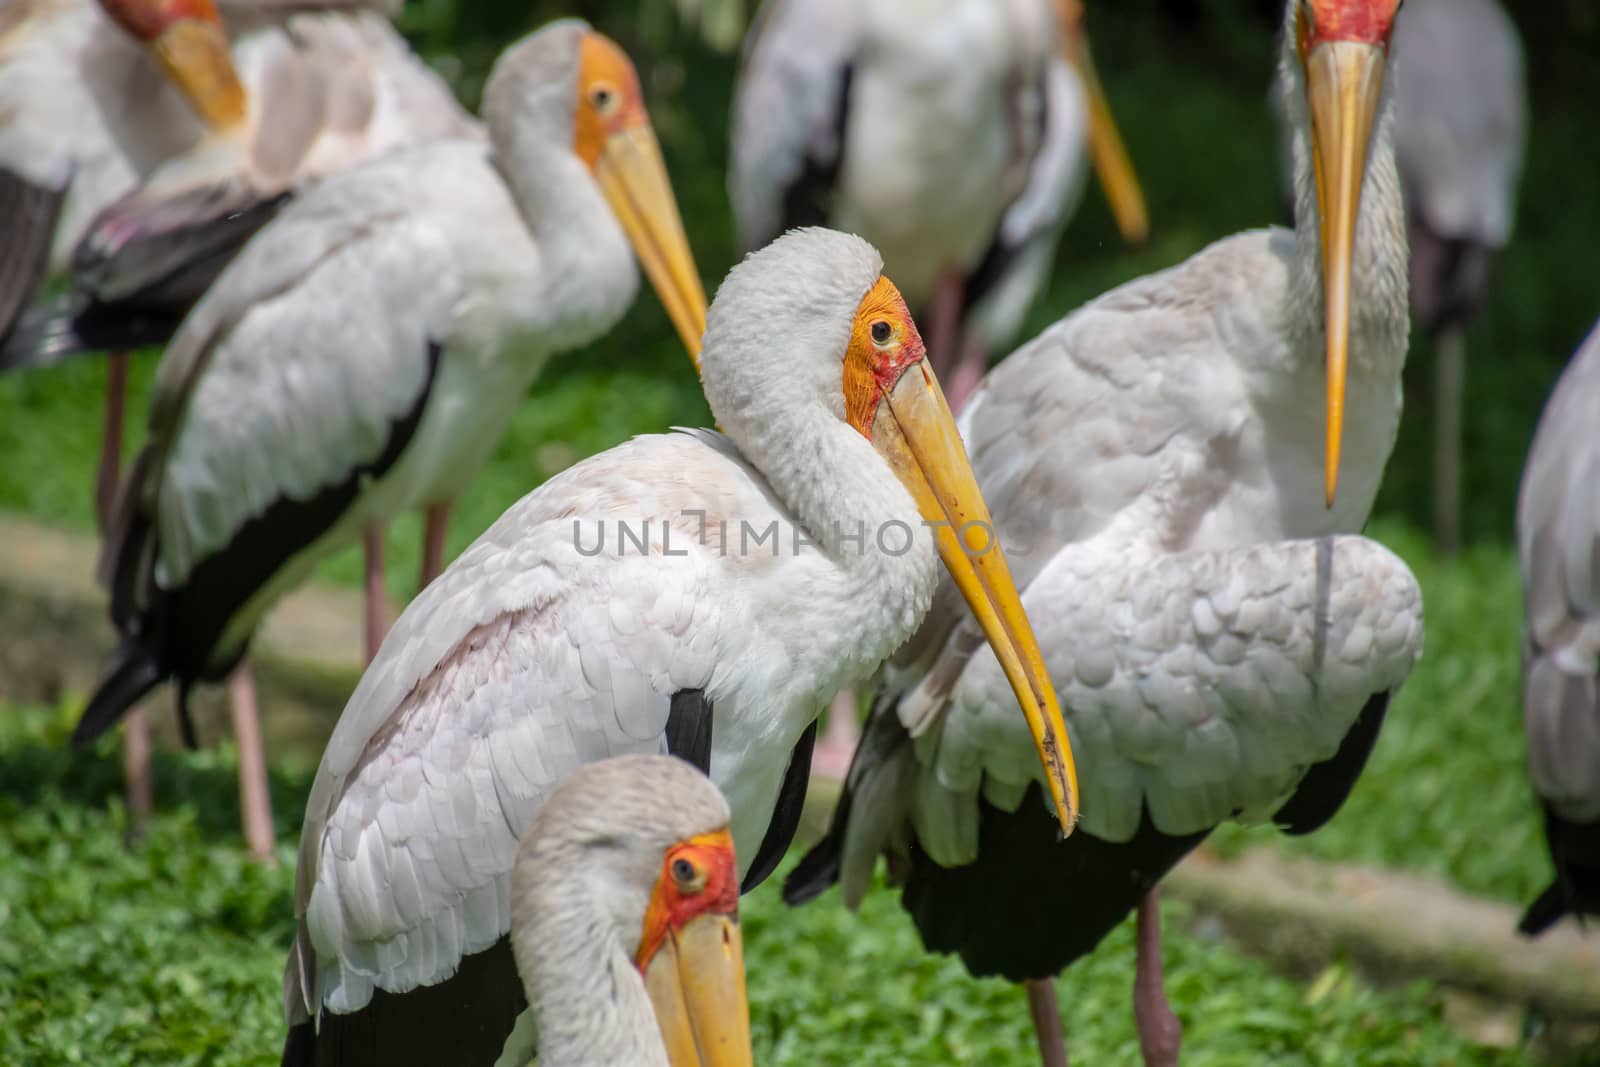 Yellow-billed stork swarm with white and black feathers and yellow beak in Asia